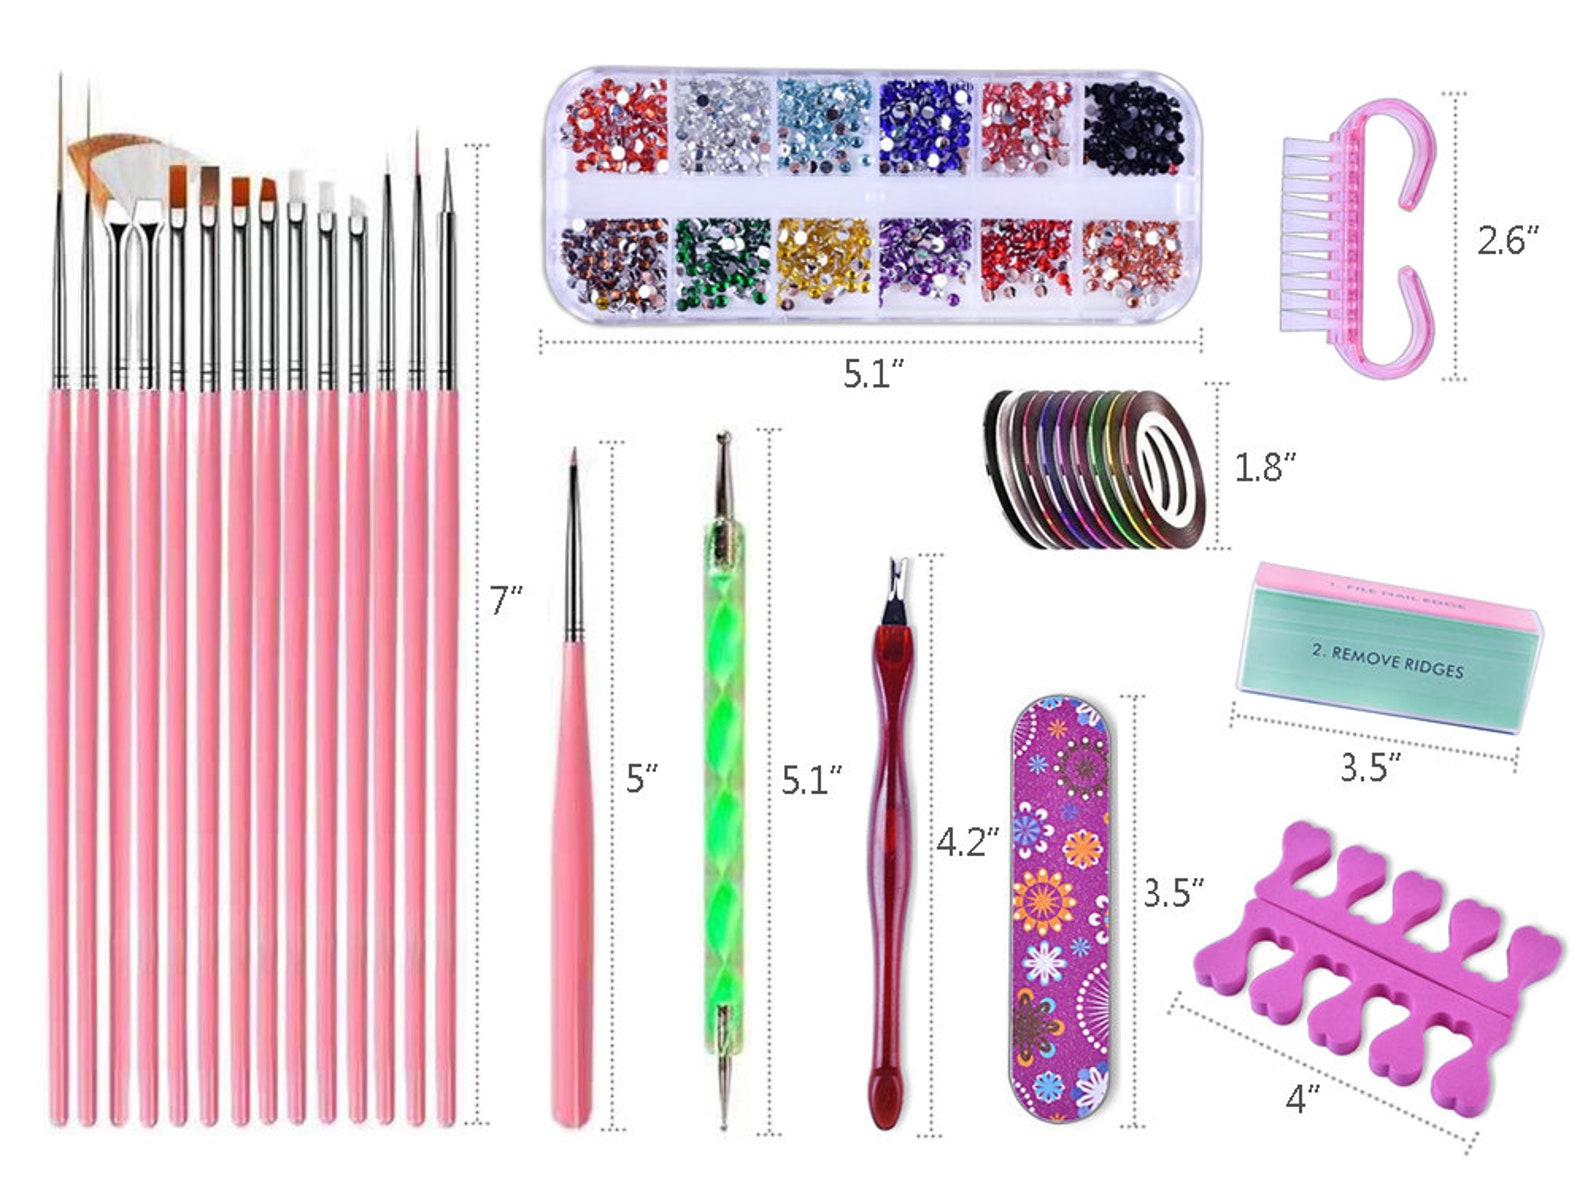 10. Where to Buy Affordable Nail Art Kits Online - wide 5